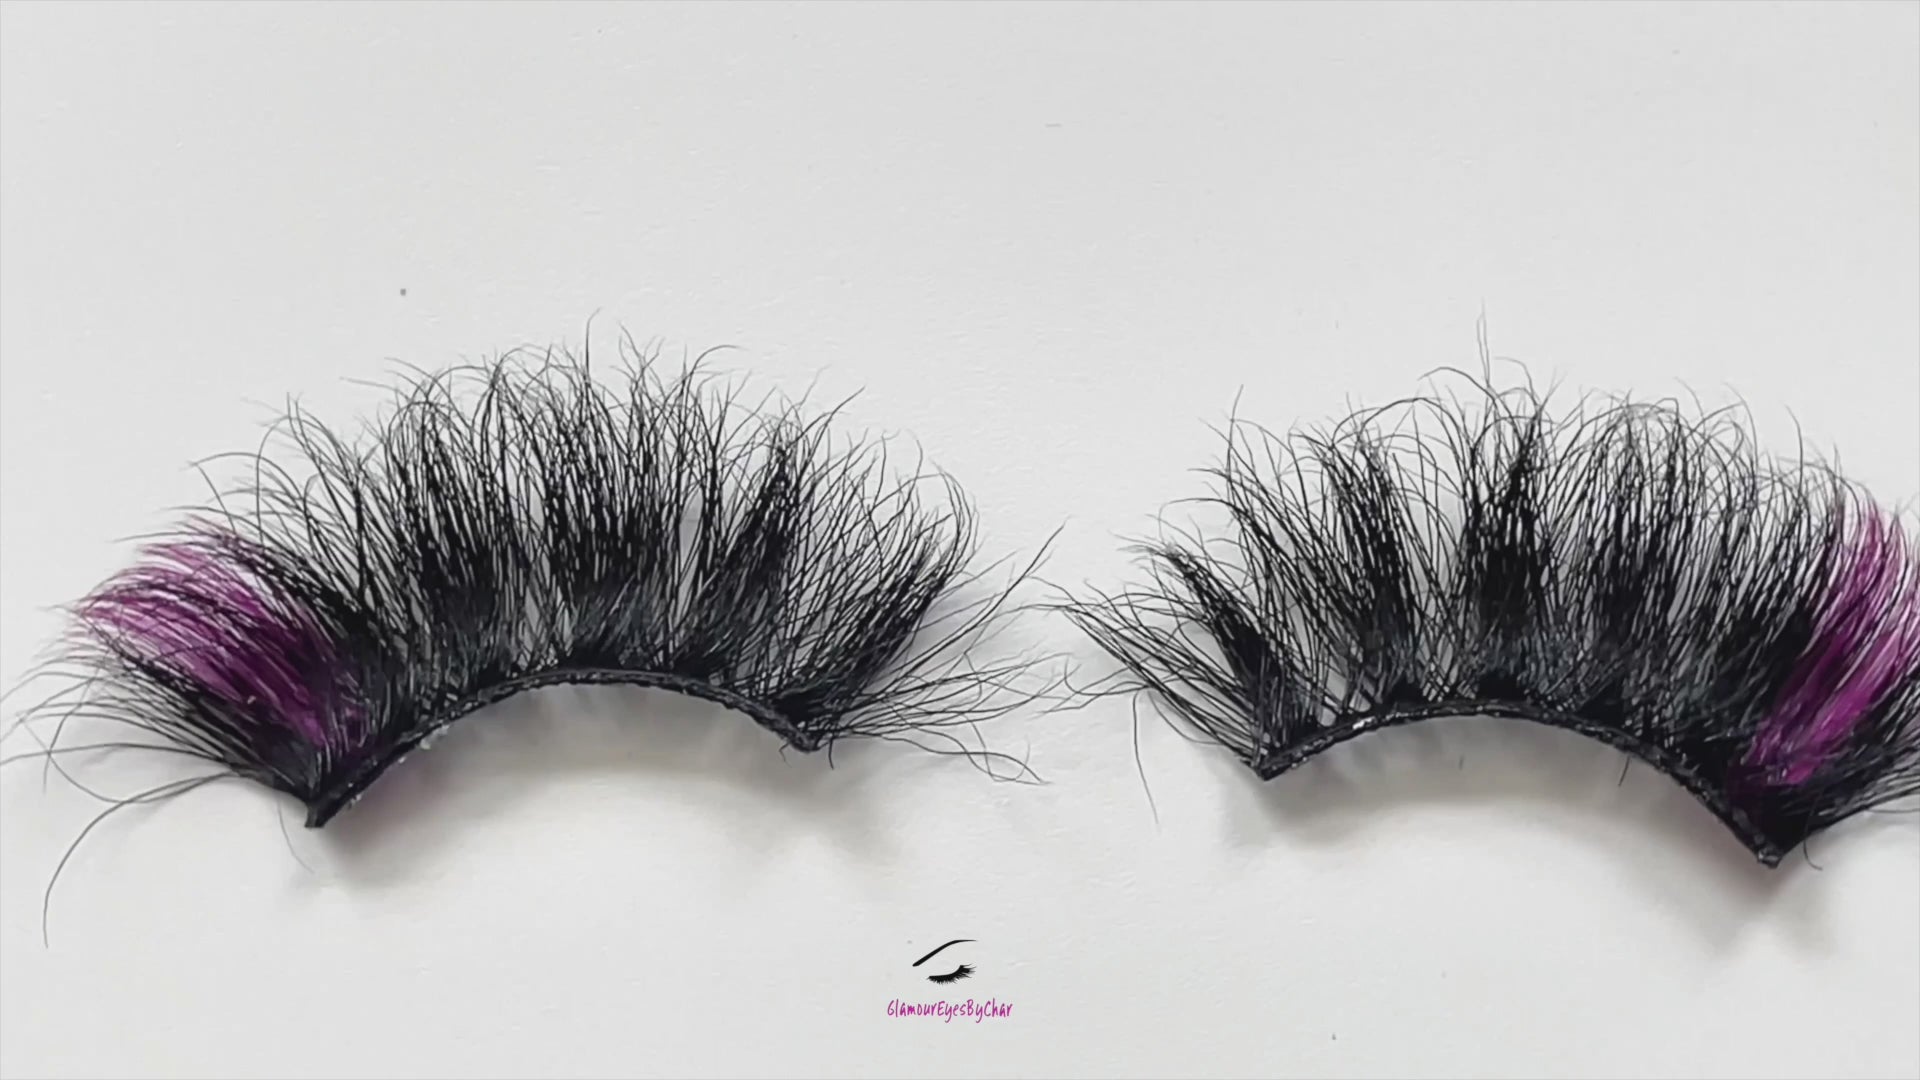 These 5D premium mink lashes are 25mm in length. They are soft, lightweight, and comfortable to wear on the lids. The subtle pop of violet on the outer corner adds playfulness to your eyes. The flexible cotton lash band, makes the application process a breeze. 